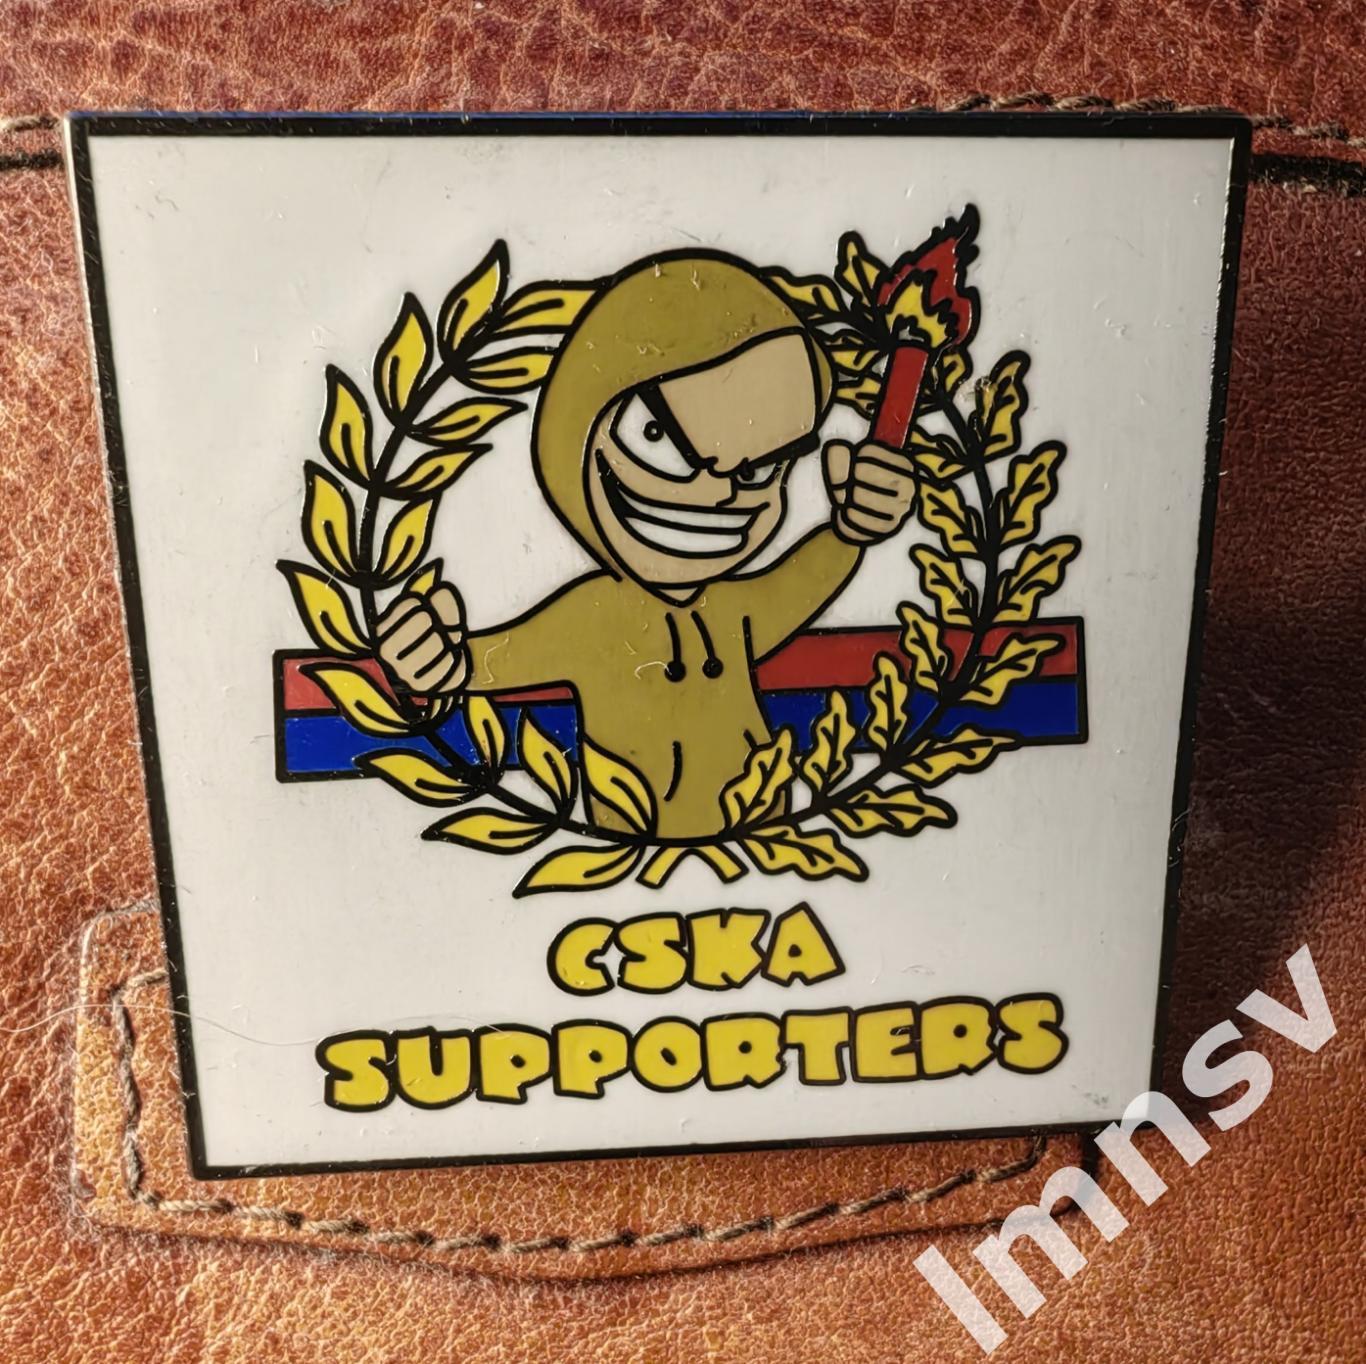 ЦСКА Supporters №1 y